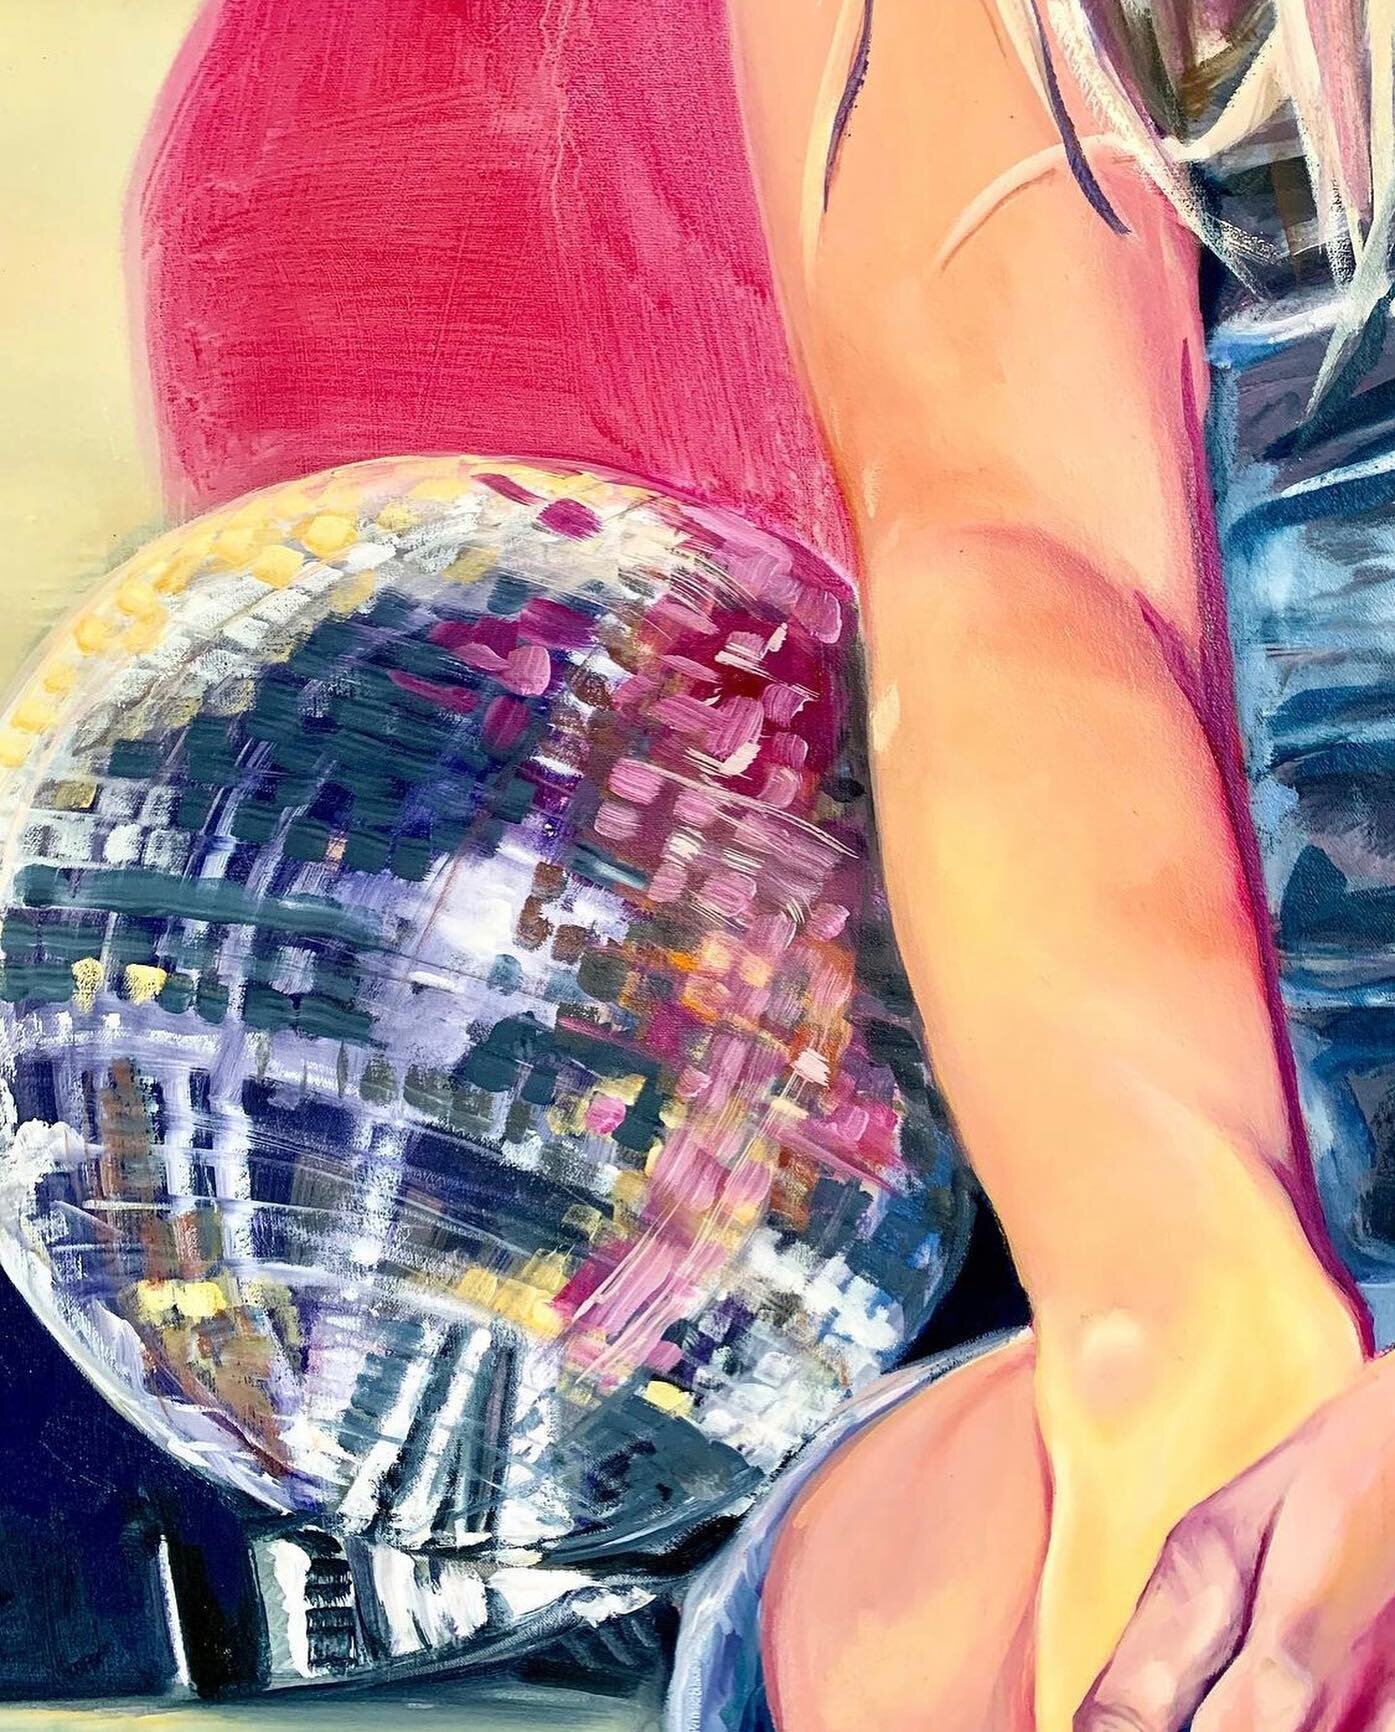 I hope everyone&rsquo;s New Year is as sparkly and this disco ball! 🥳🥂✨ 
⠀⠀⠀⠀⠀⠀⠀⠀⠀
Detail shot from &ldquo;Everything in Moderation&rdquo; 
Oil paint on canvas 
40&rdquo; x 78&rdquo;
.
.
.
.
.
.
.
.
.
.
.
#artbyalifutrell #discoball #mirrorball #oi